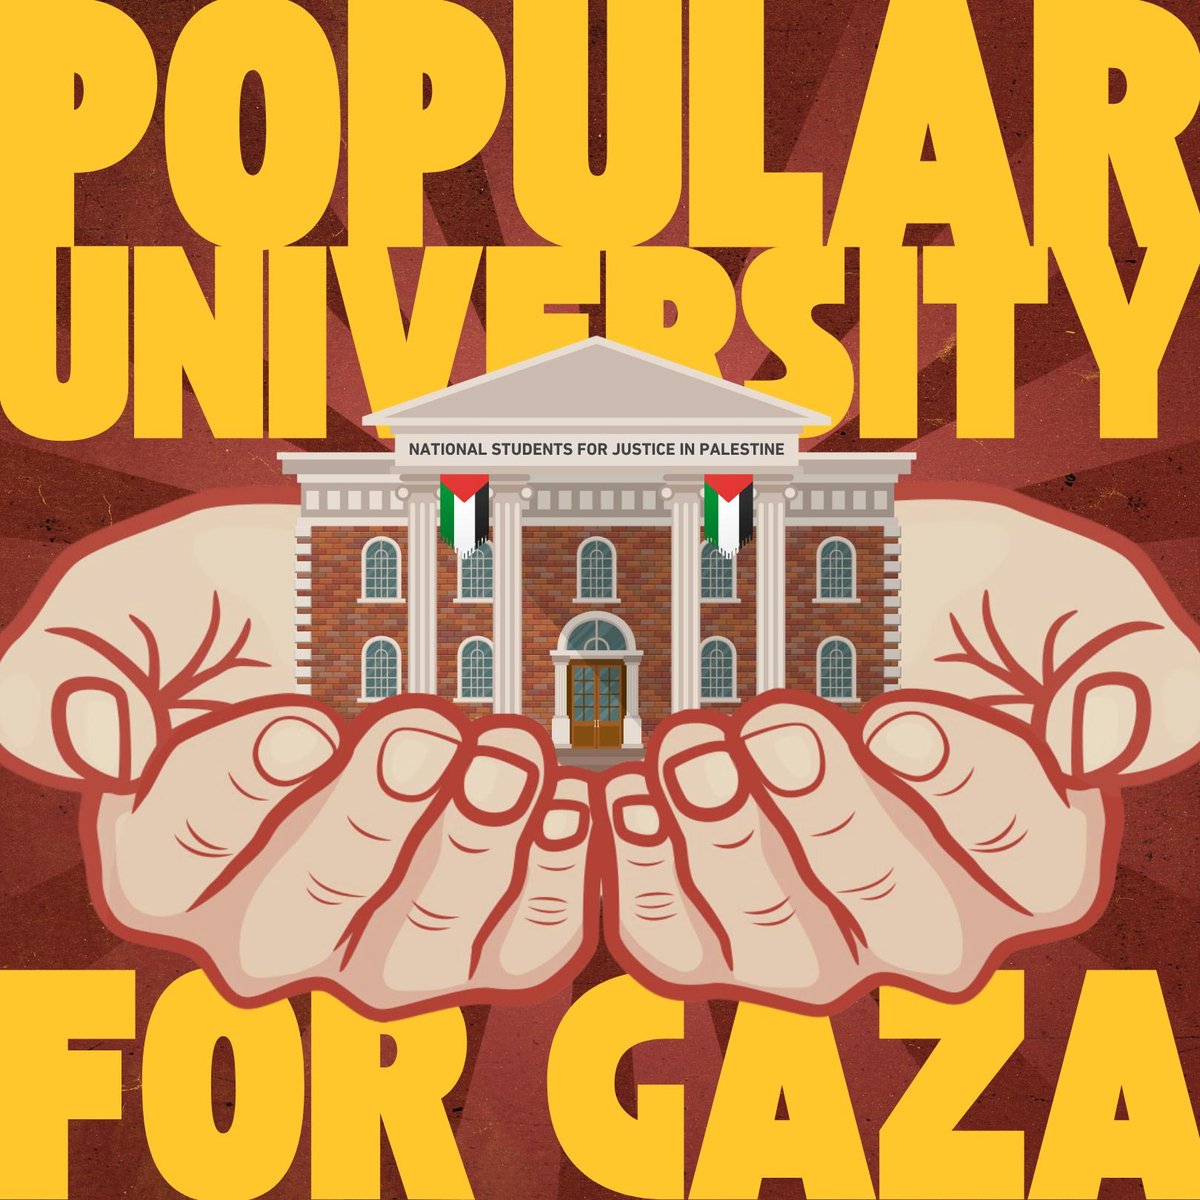 🇵🇸 WE ARE ALL SJP! 🇵🇸 Our universities have chosen profit and reputation over the lives of the people of Palestine and our will as students. In the footsteps of our comrades at Rutgers, Tufts, and Columbia, we will take back our university and force our administration to divest!